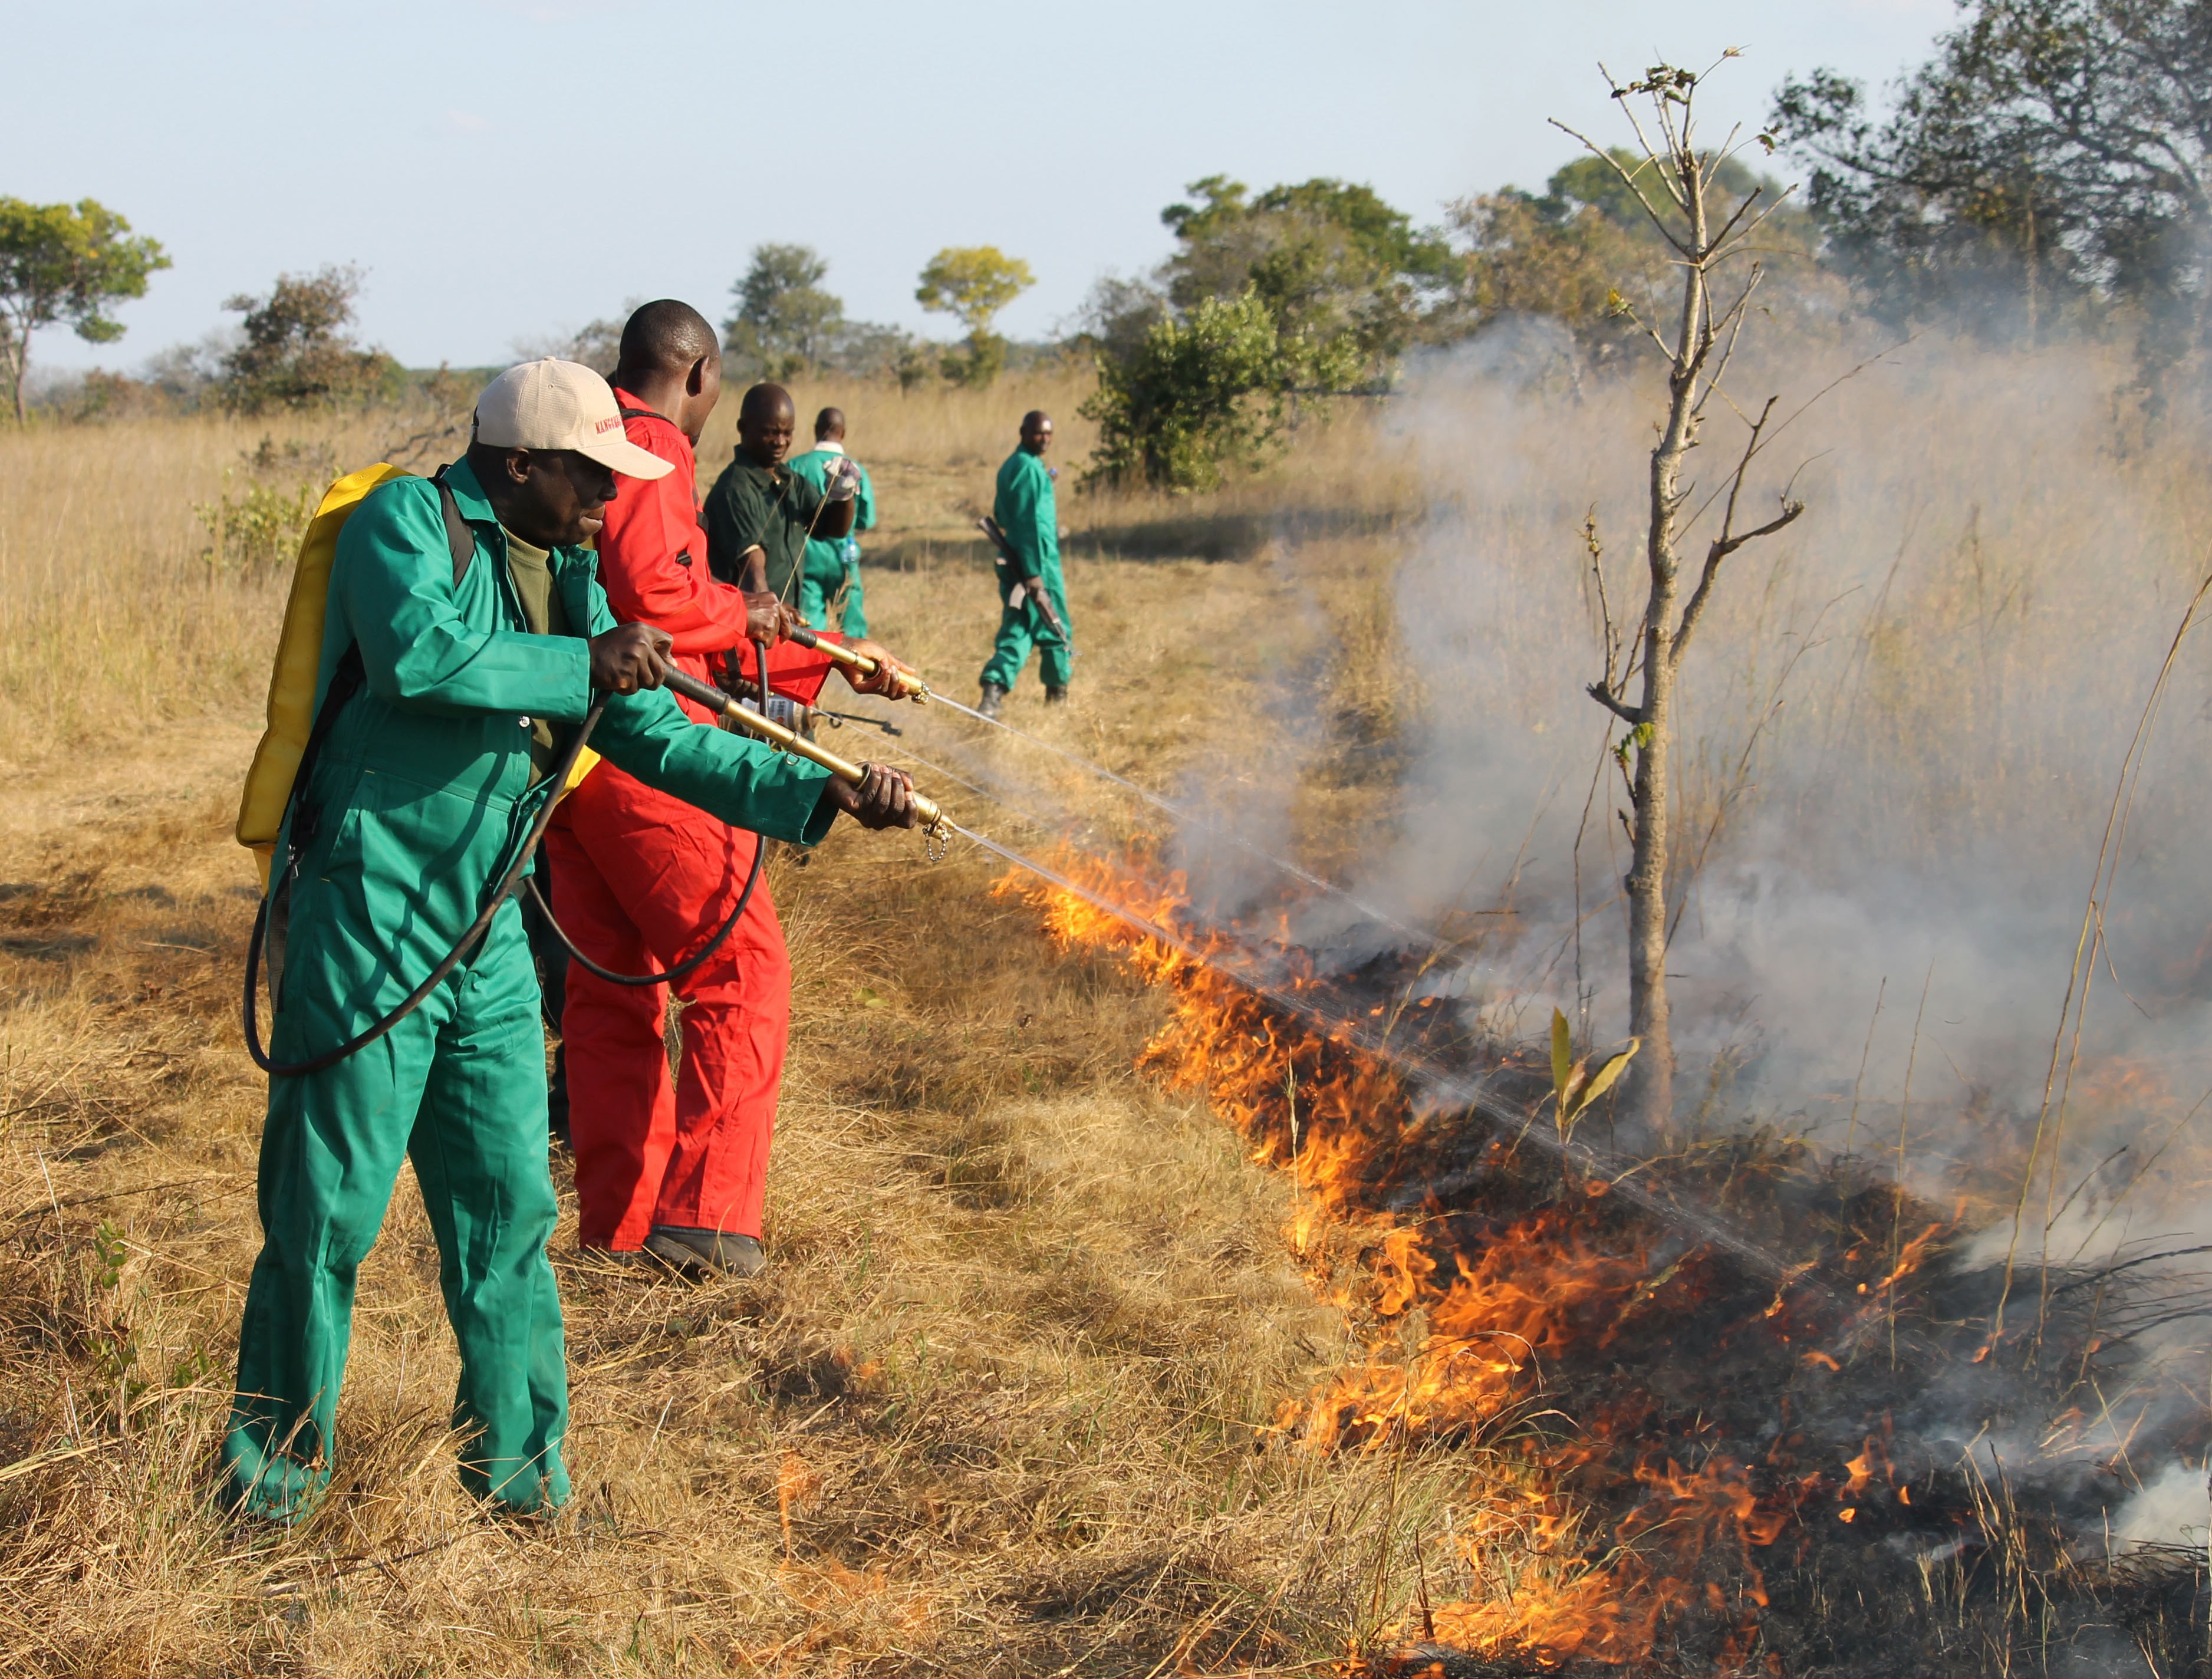 Firefighters conduct controlled burn in Zambia.